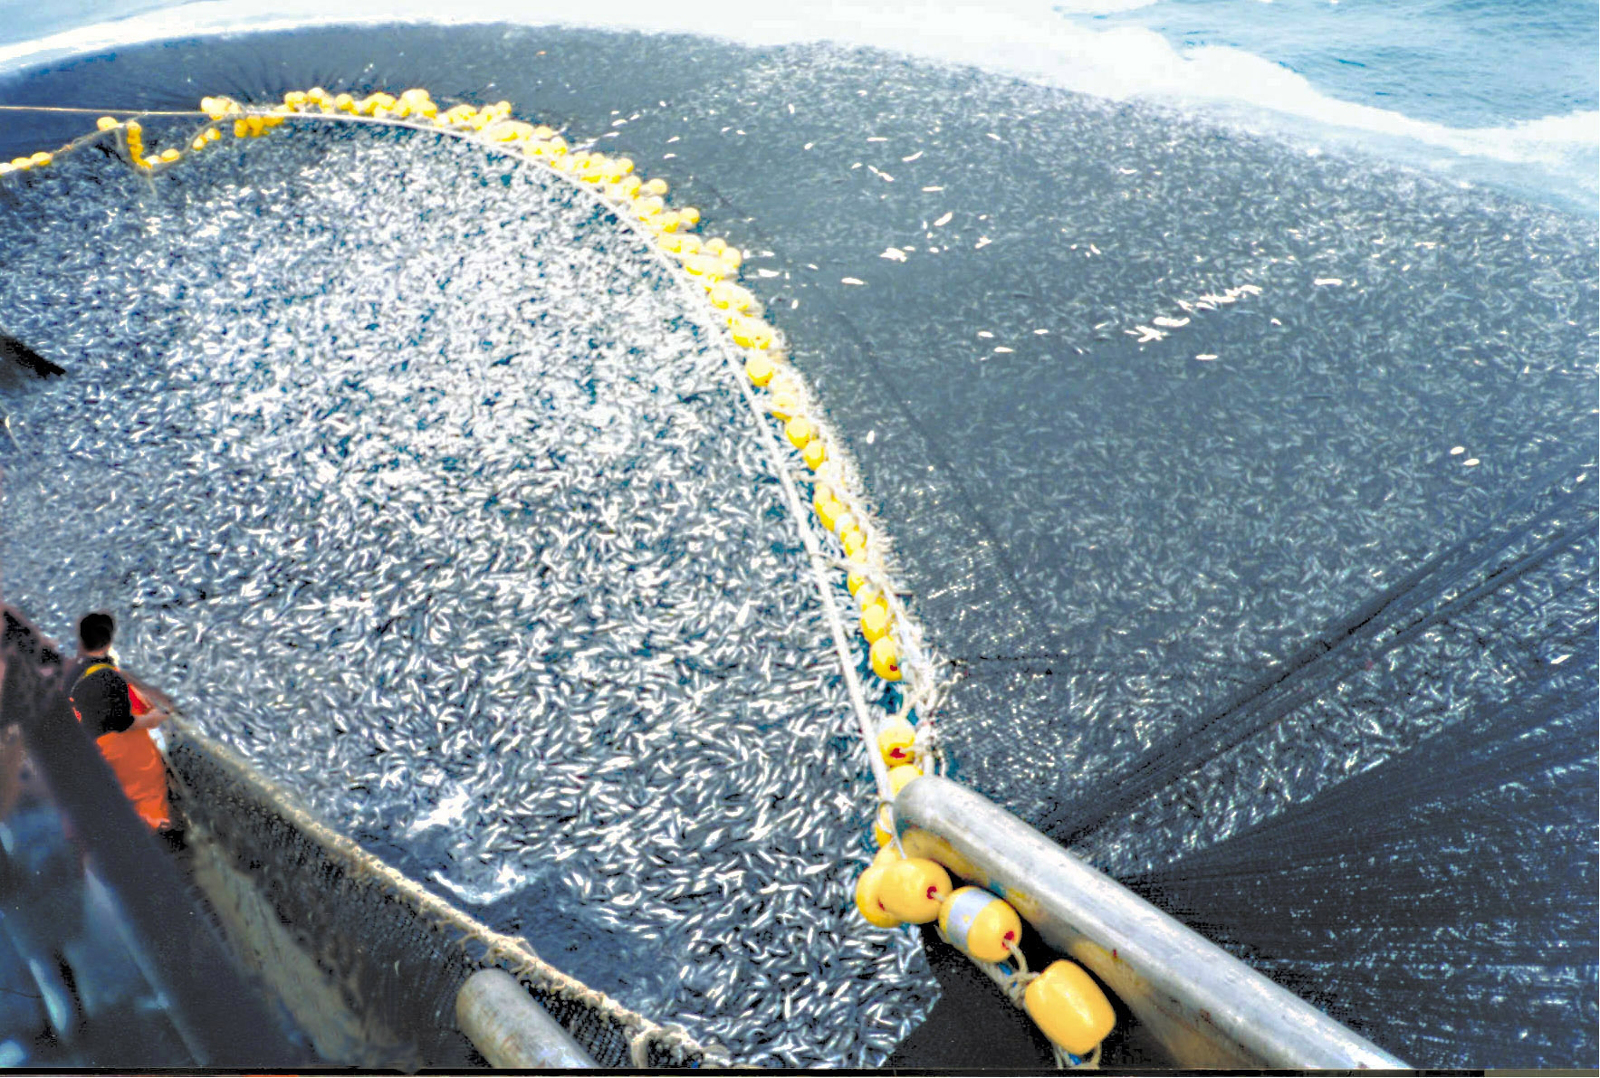 Yikes! New Study Finds That We've Grossly Underestimated the Volume of Overfishing